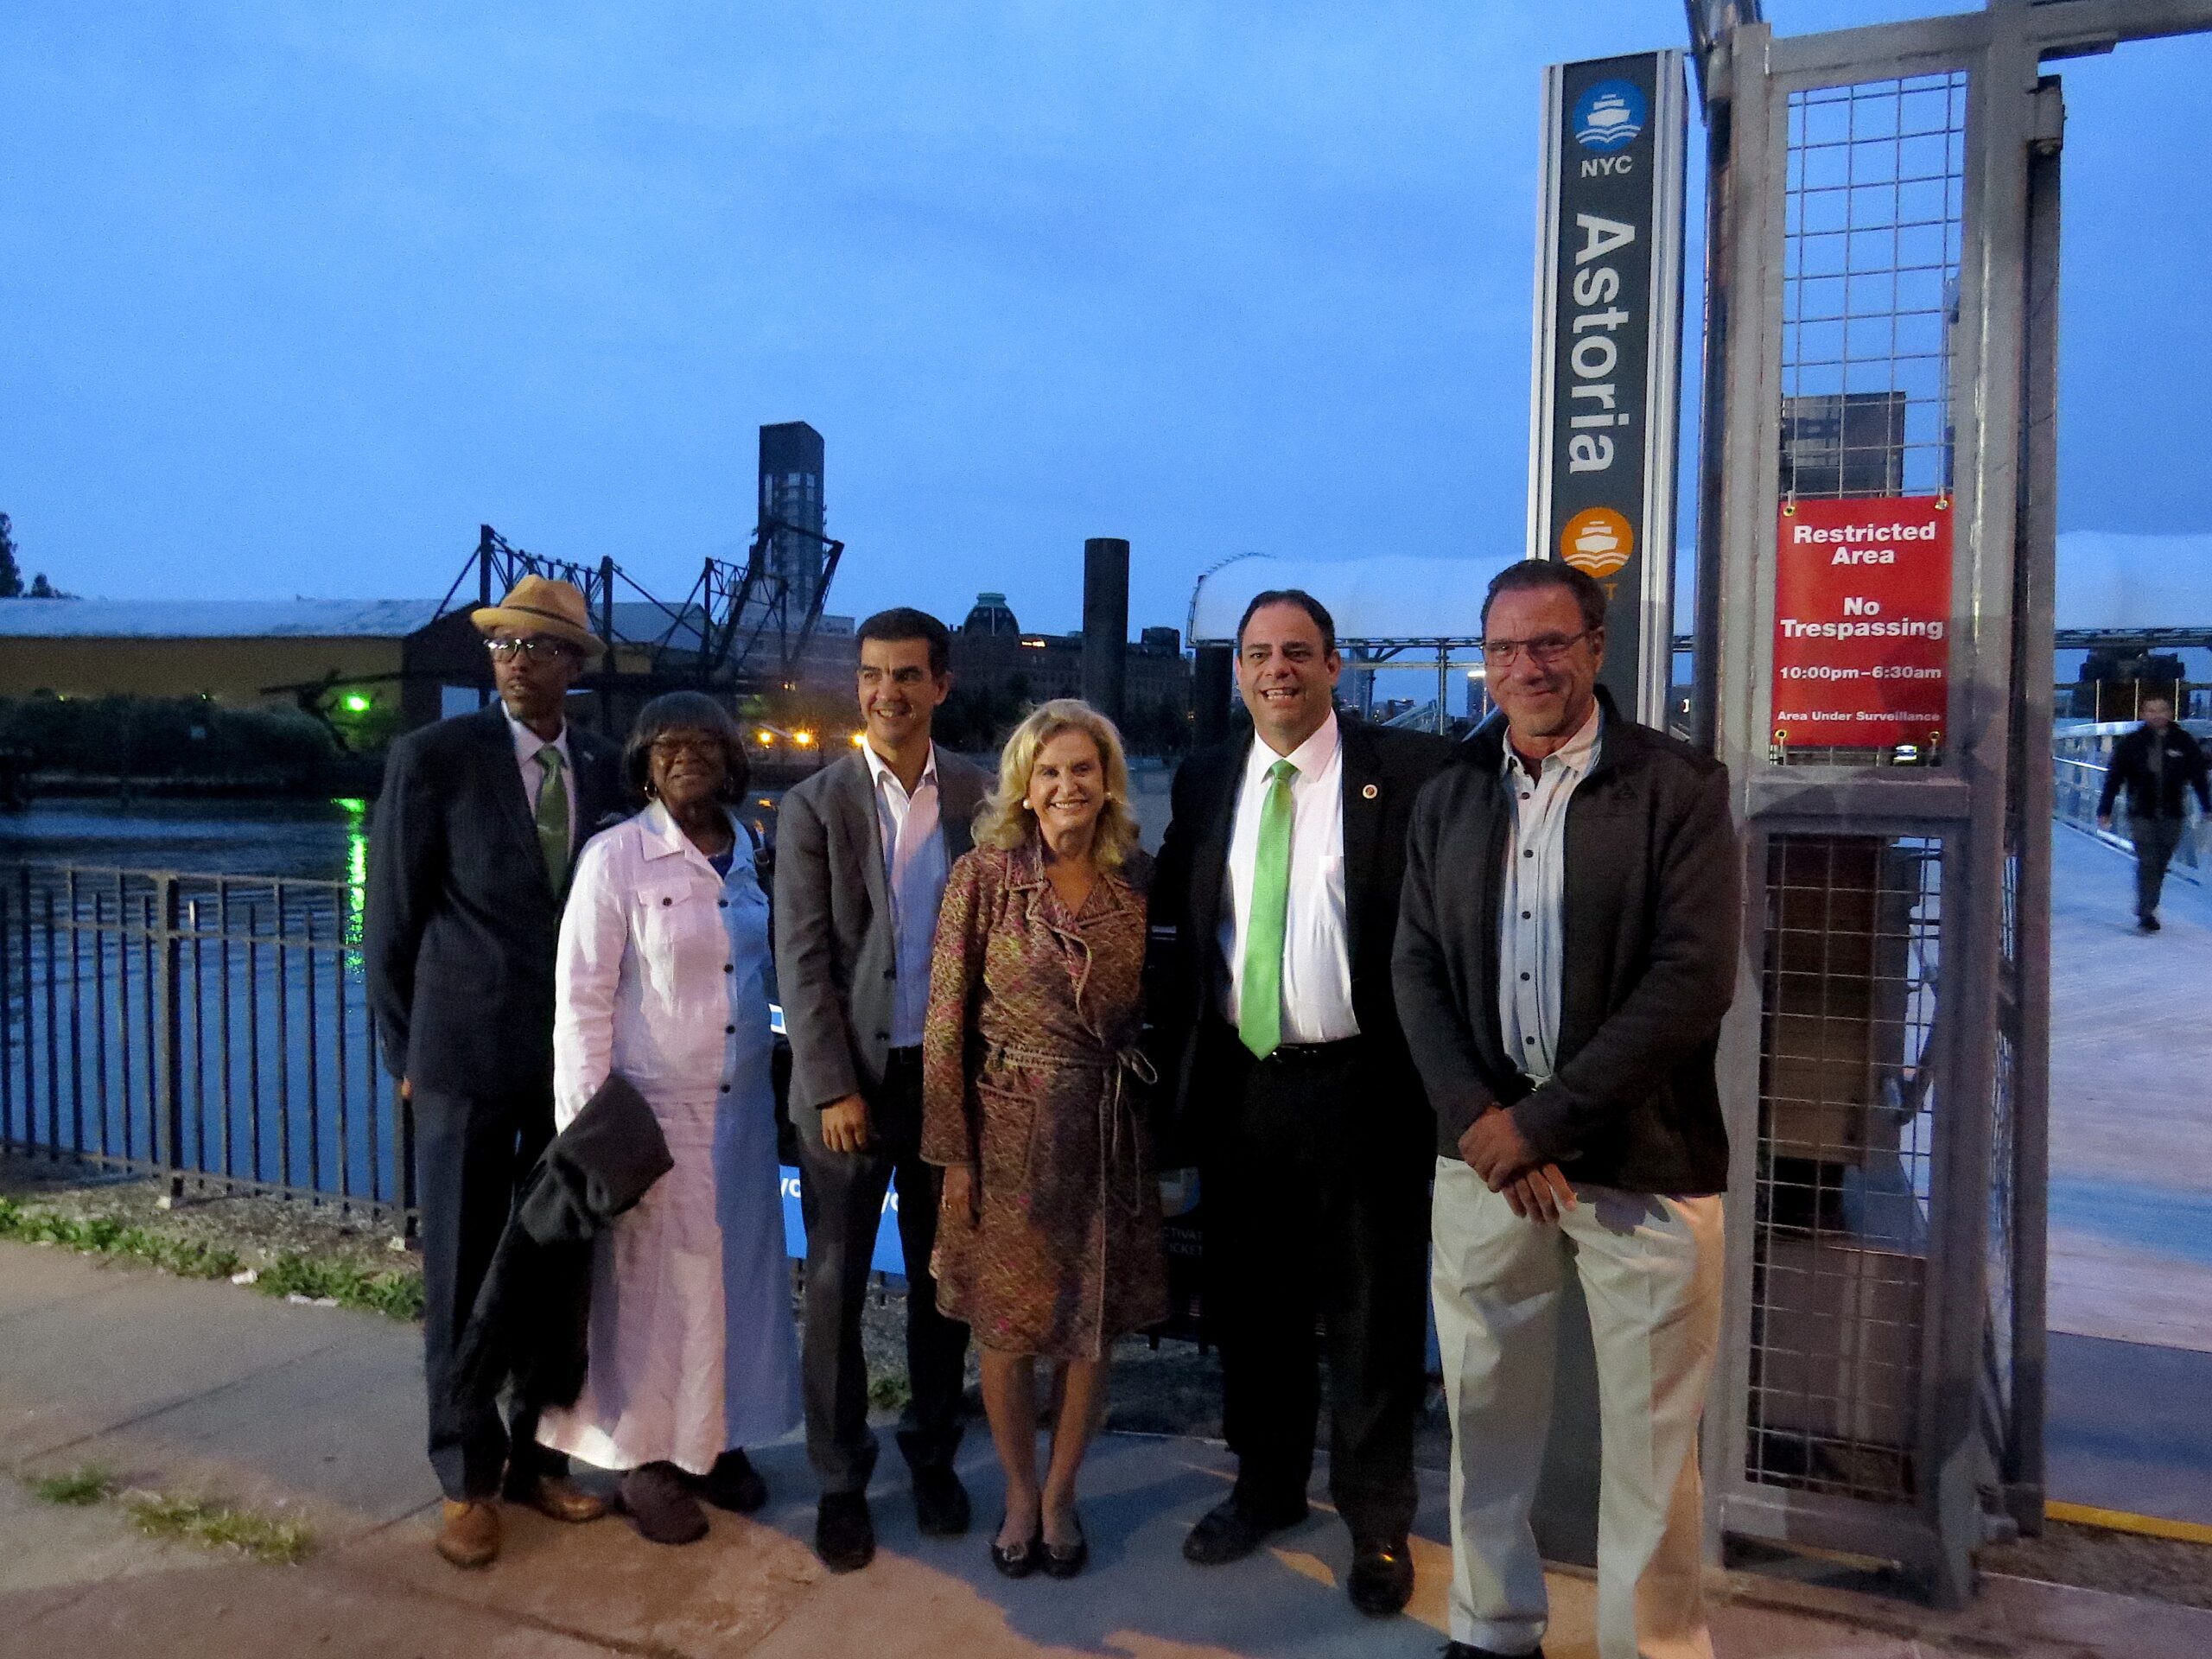 Pre-launch: Andre Stith, Organizing Director, Zone 126; Claudia Coger, President, Astoria Houses Tenants Association; Council Member Ydanis A. Rodriguez, Chair of the Transportation Committee; Congresswoman Carolyn Maloney; Council Member Costa Constantinides; Richard Khuzami, President, Old Astoria Neighborhood Association